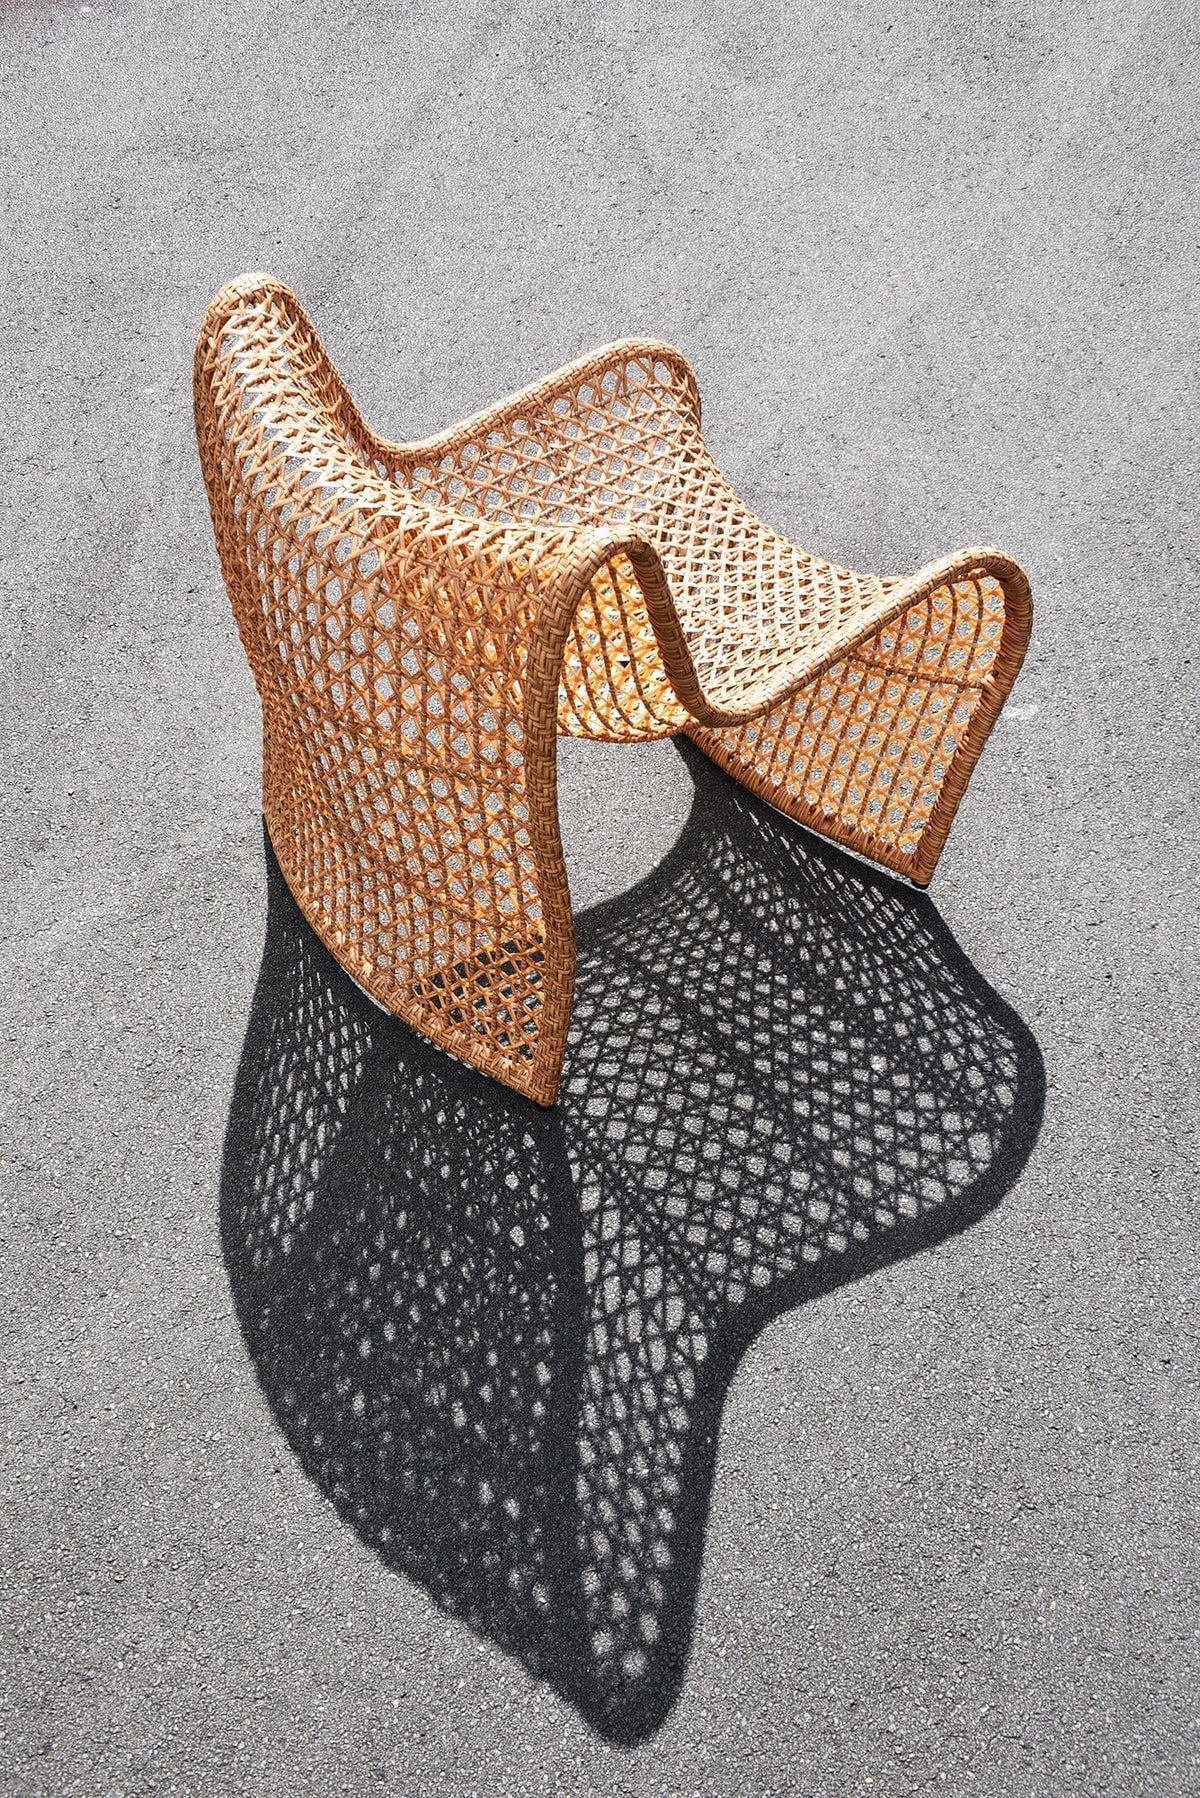 Birds-eye view of a wave chair made of cane.